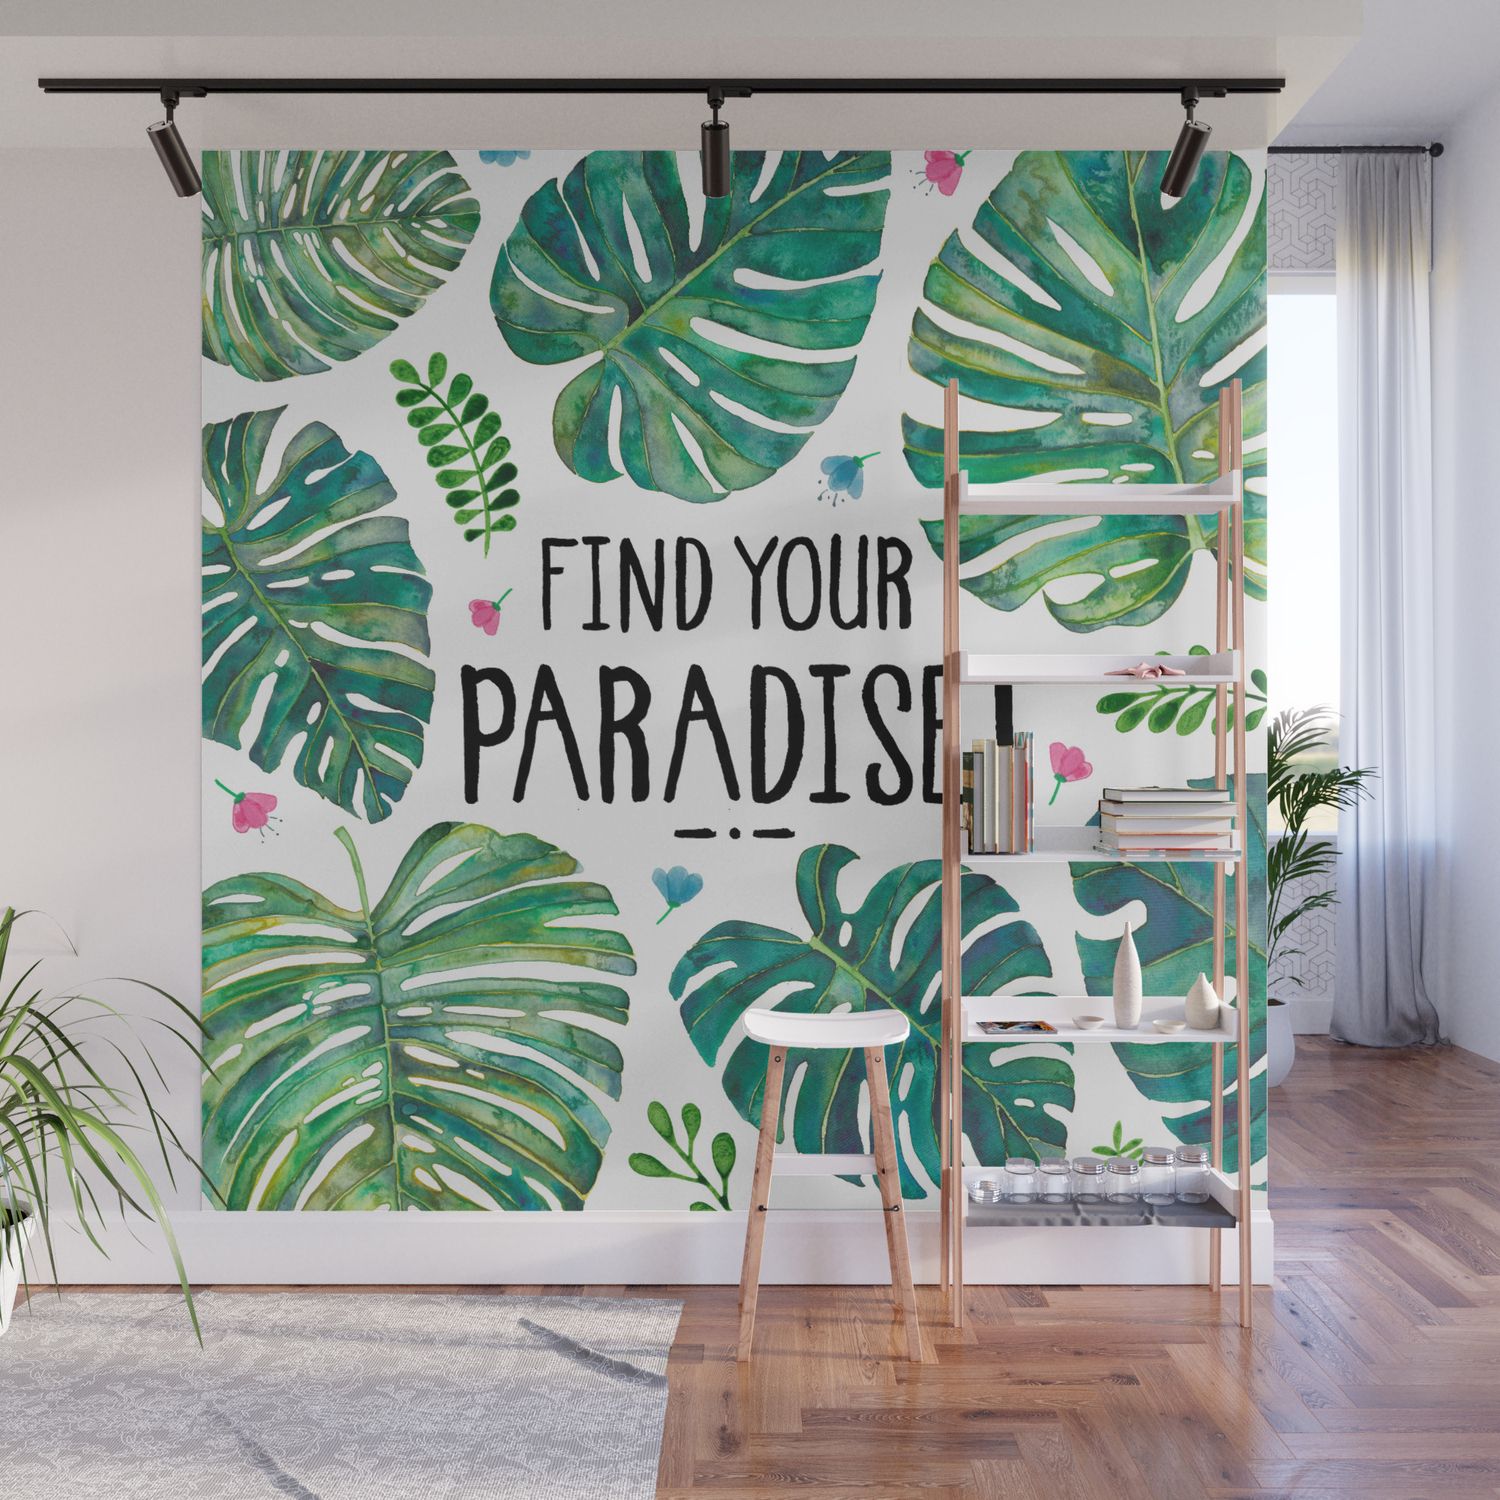 Tropical Paradise Wall Muralelena O'neill | Society6 Intended For Most Recent Tropical Paradise Wall Art (View 18 of 20)